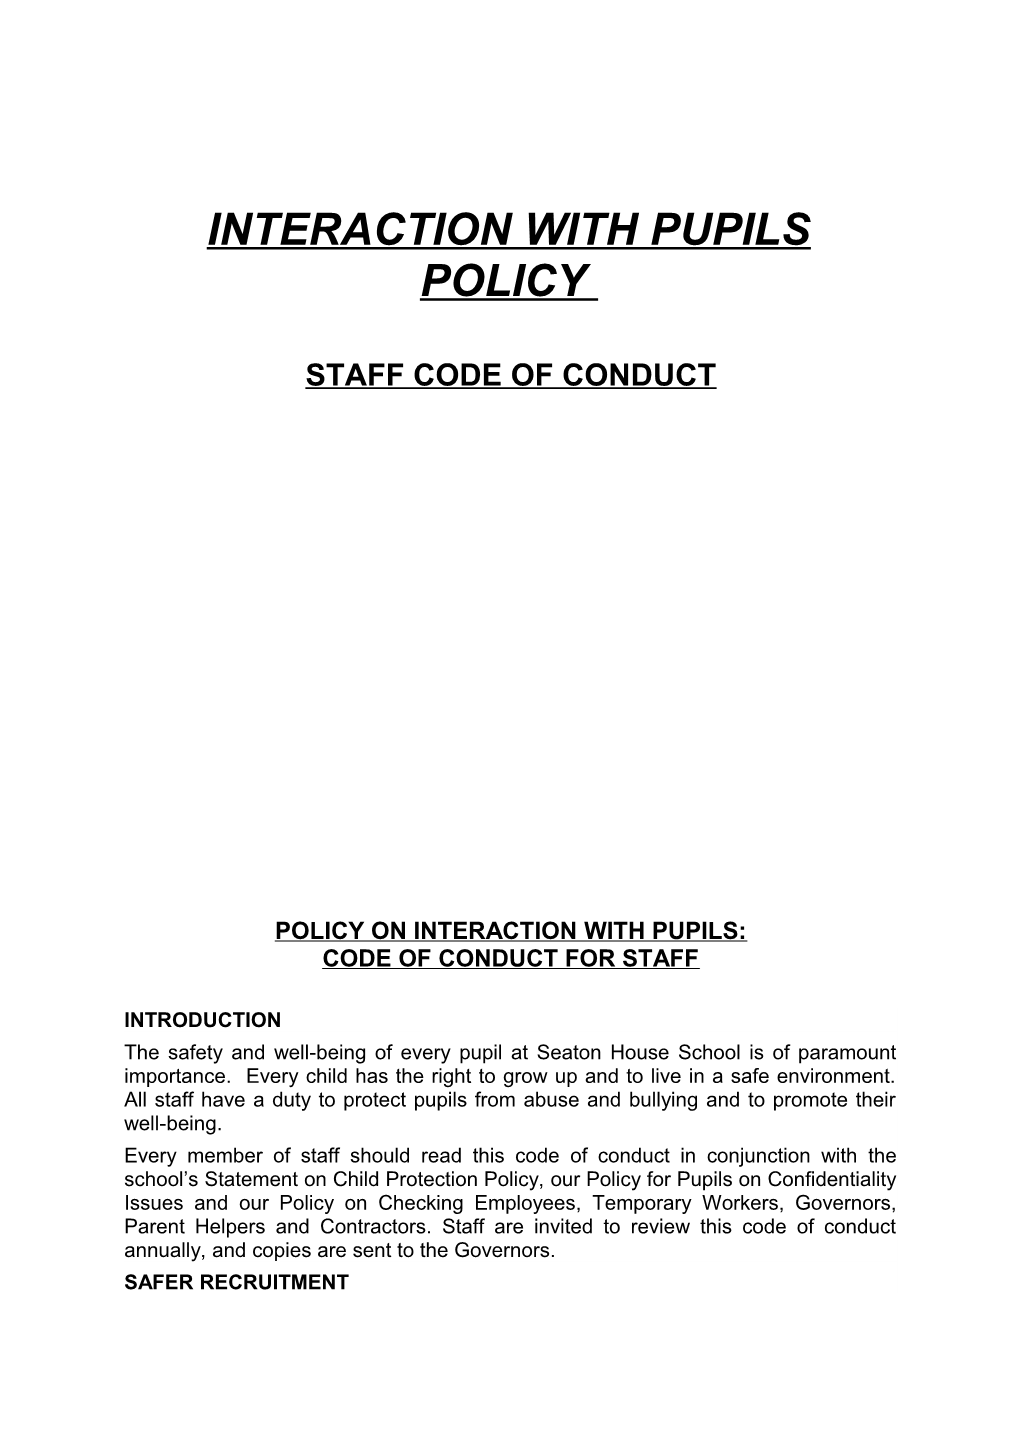 Interaction with Pupils Policy